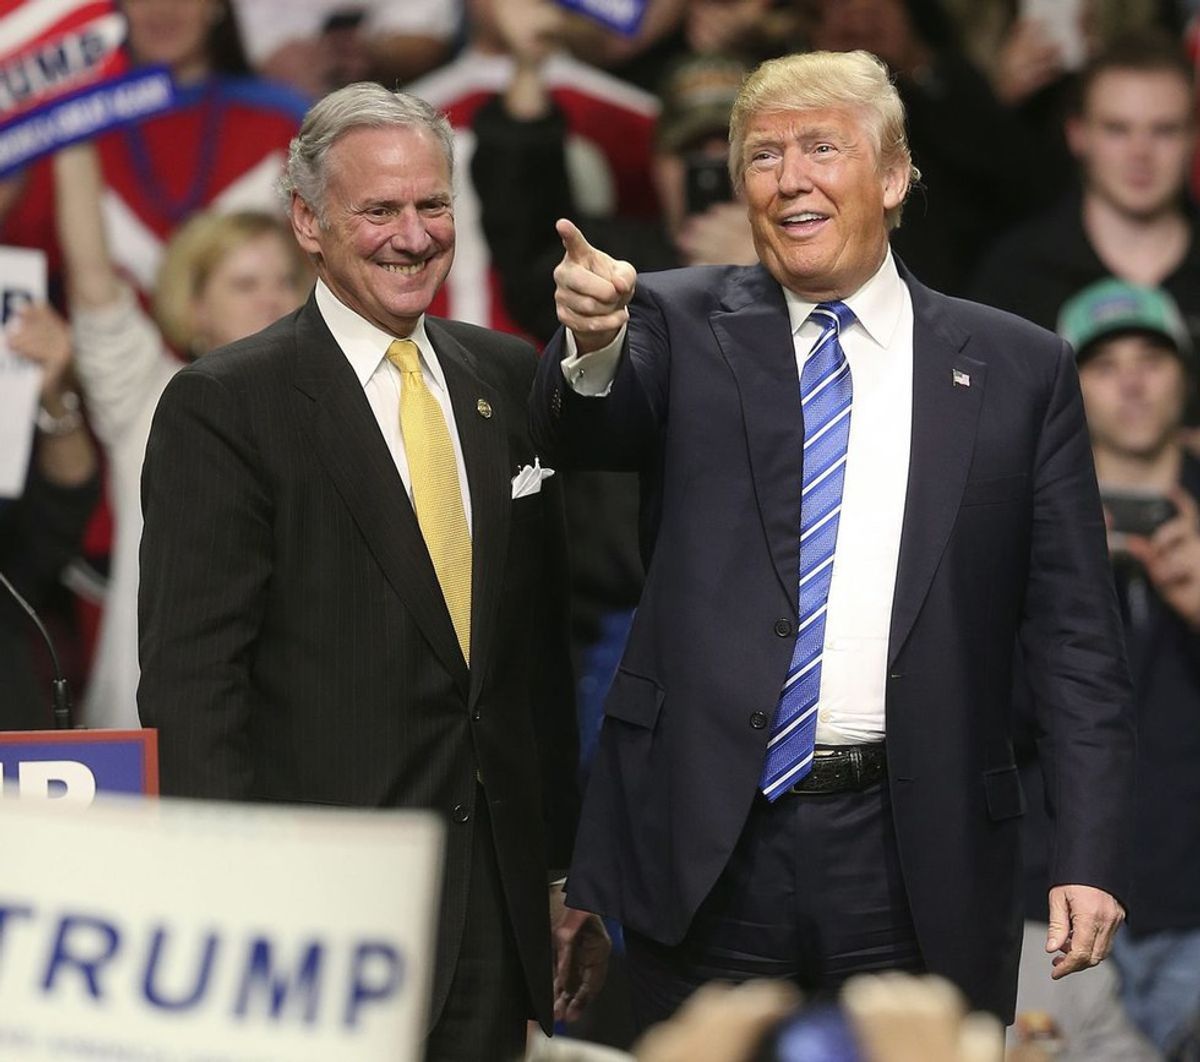 South Carolina Governor And President Trump Ally Refuses To Give Up Racist Membership